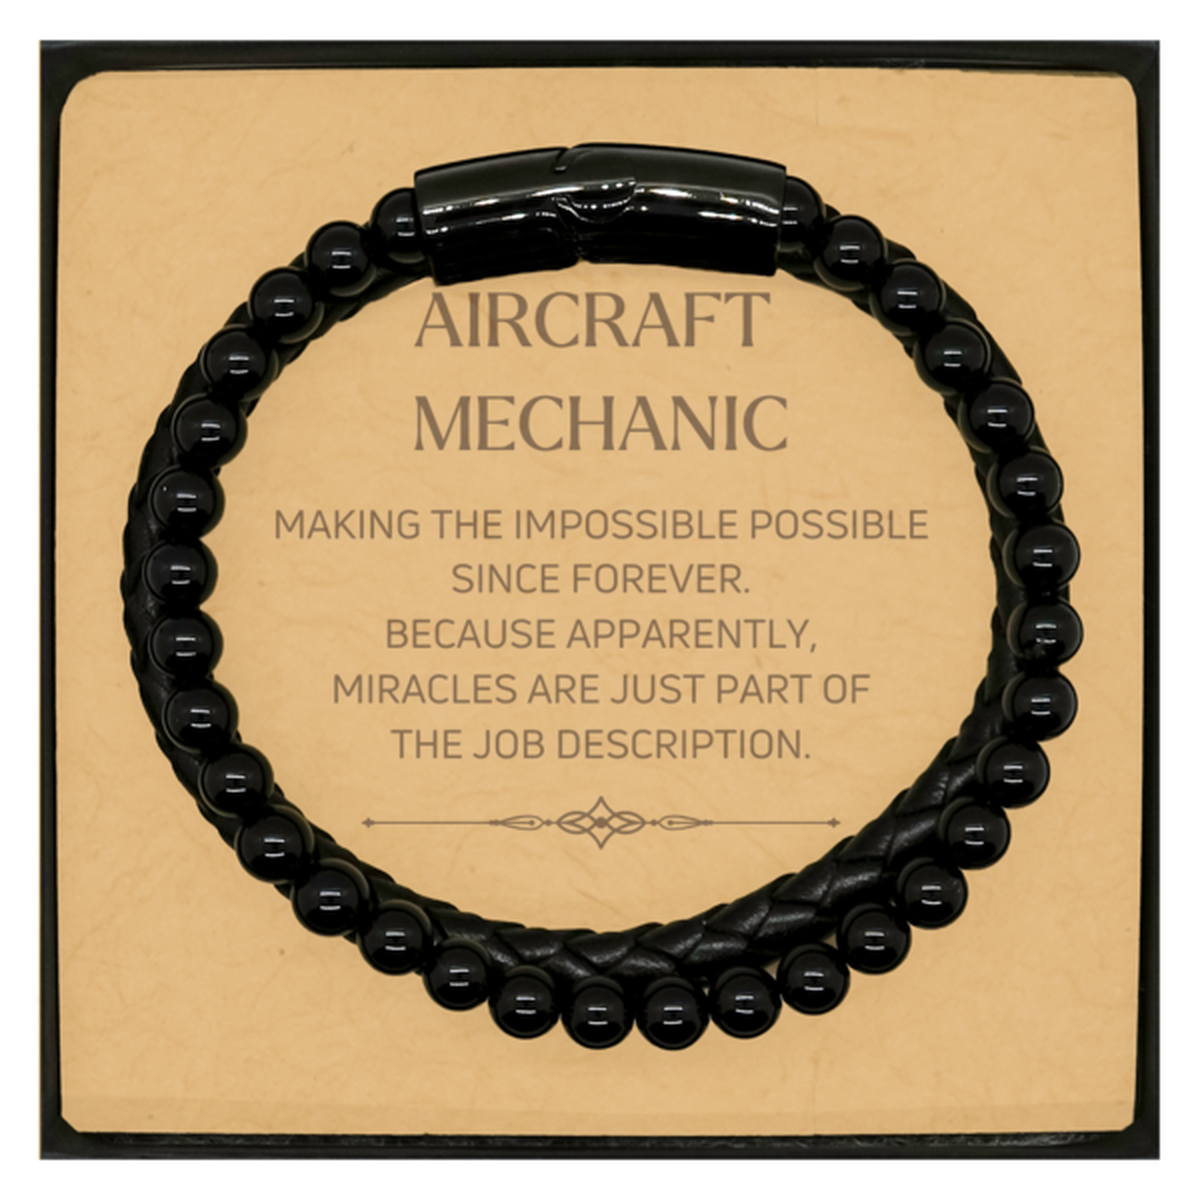 Funny Aircraft Mechanic Gifts, Miracles are just part of the job description, Inspirational Birthday Christmas Stone Leather Bracelets For Aircraft Mechanic, Men, Women, Coworkers, Friends, Boss